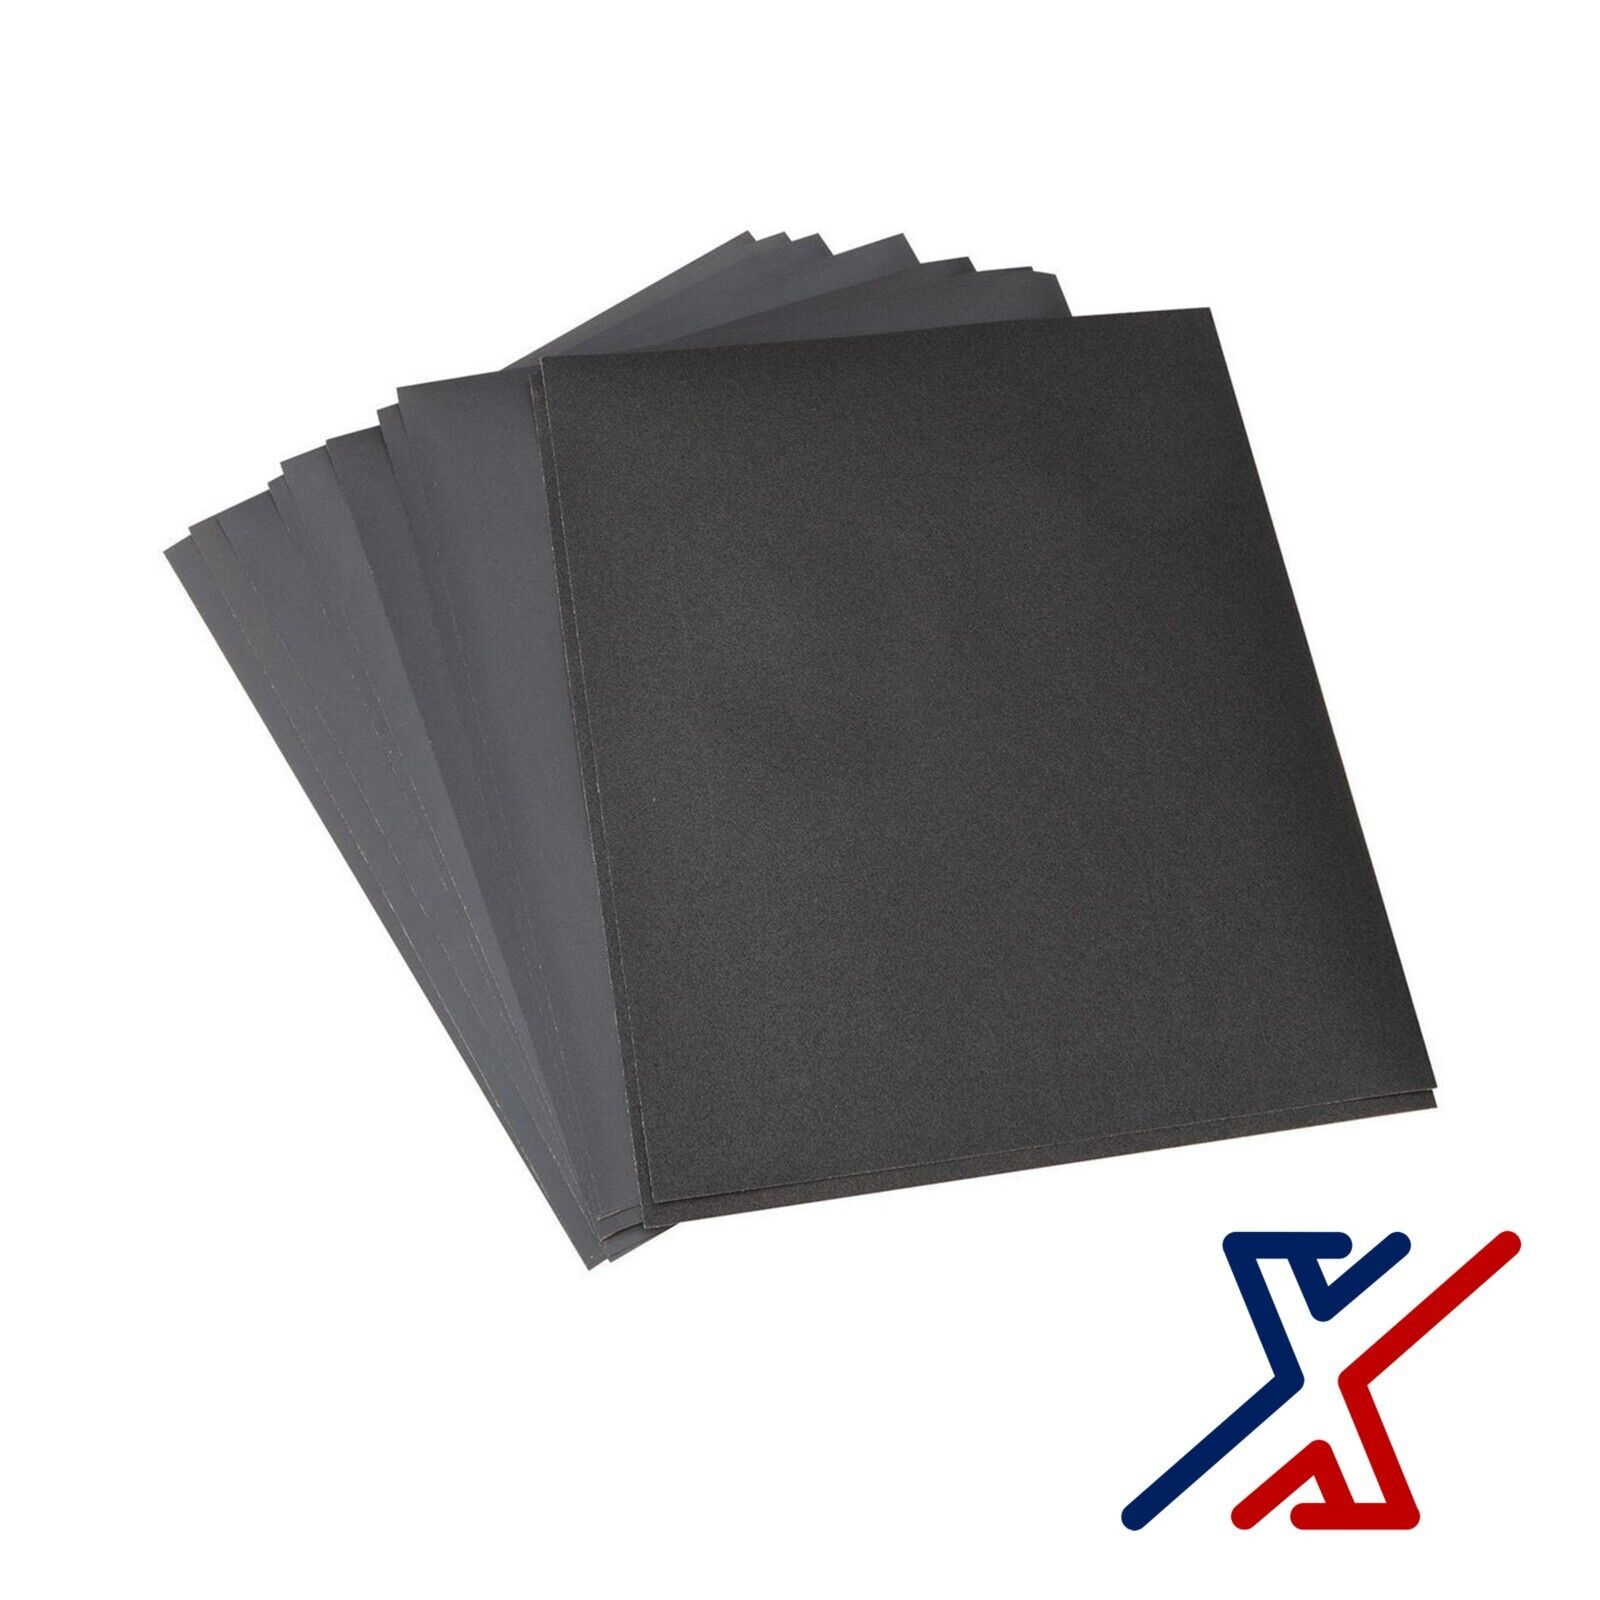 5000 Grit Premium Wet & Dry Sandpaper 9 in. x 11 in. Sheet (1 to 250 Sheets)